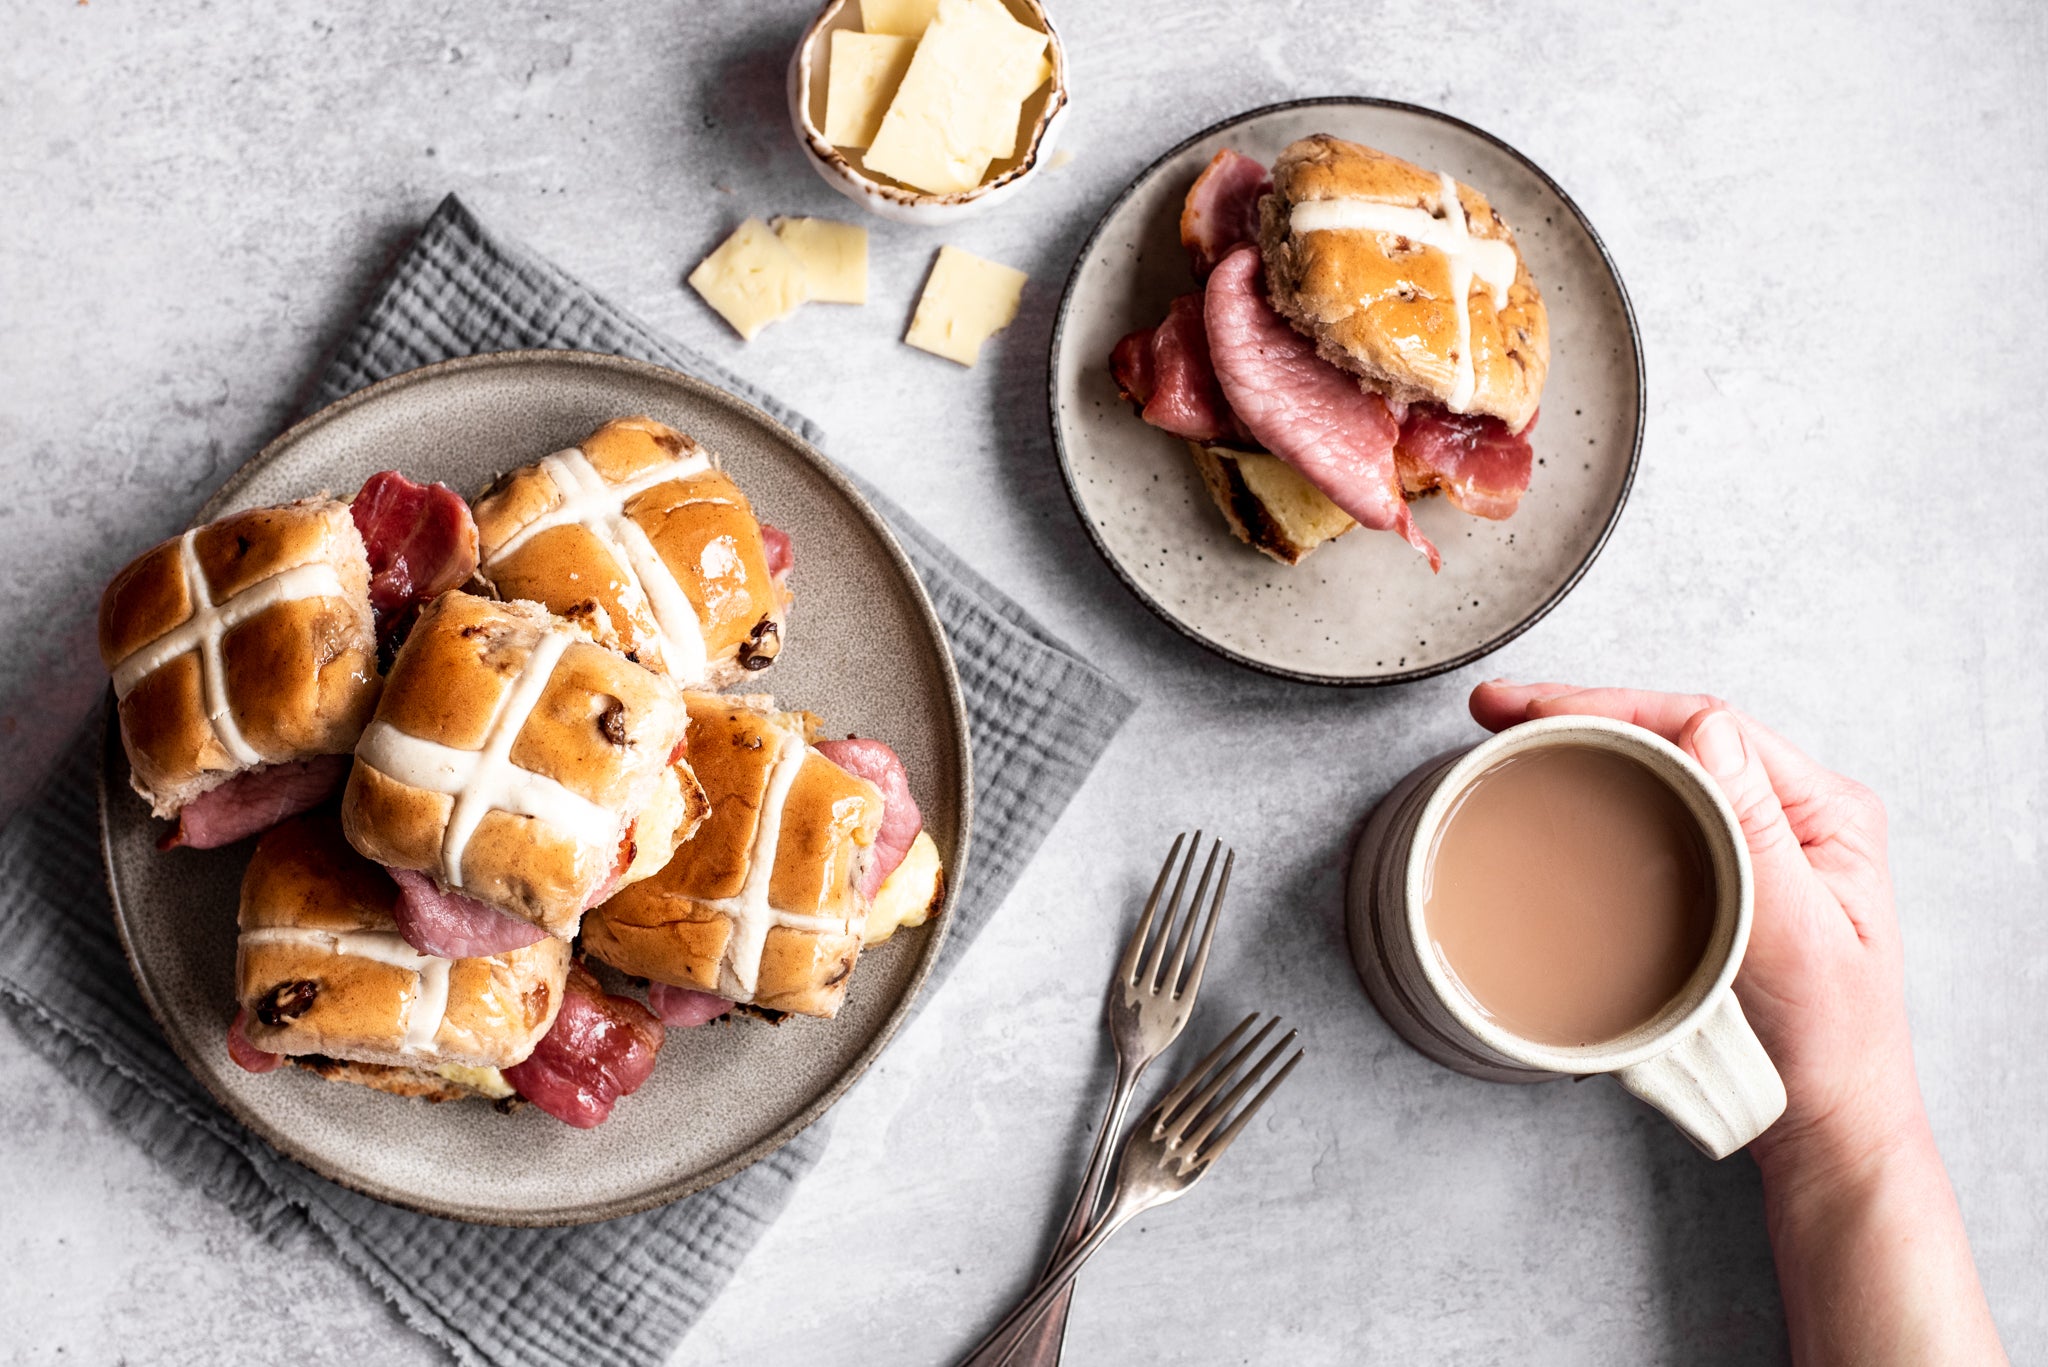 Plate of hot cross buns stacked on top of each other. Plate with hot cross bun and bacon. Cup of tea and hand. Two forks